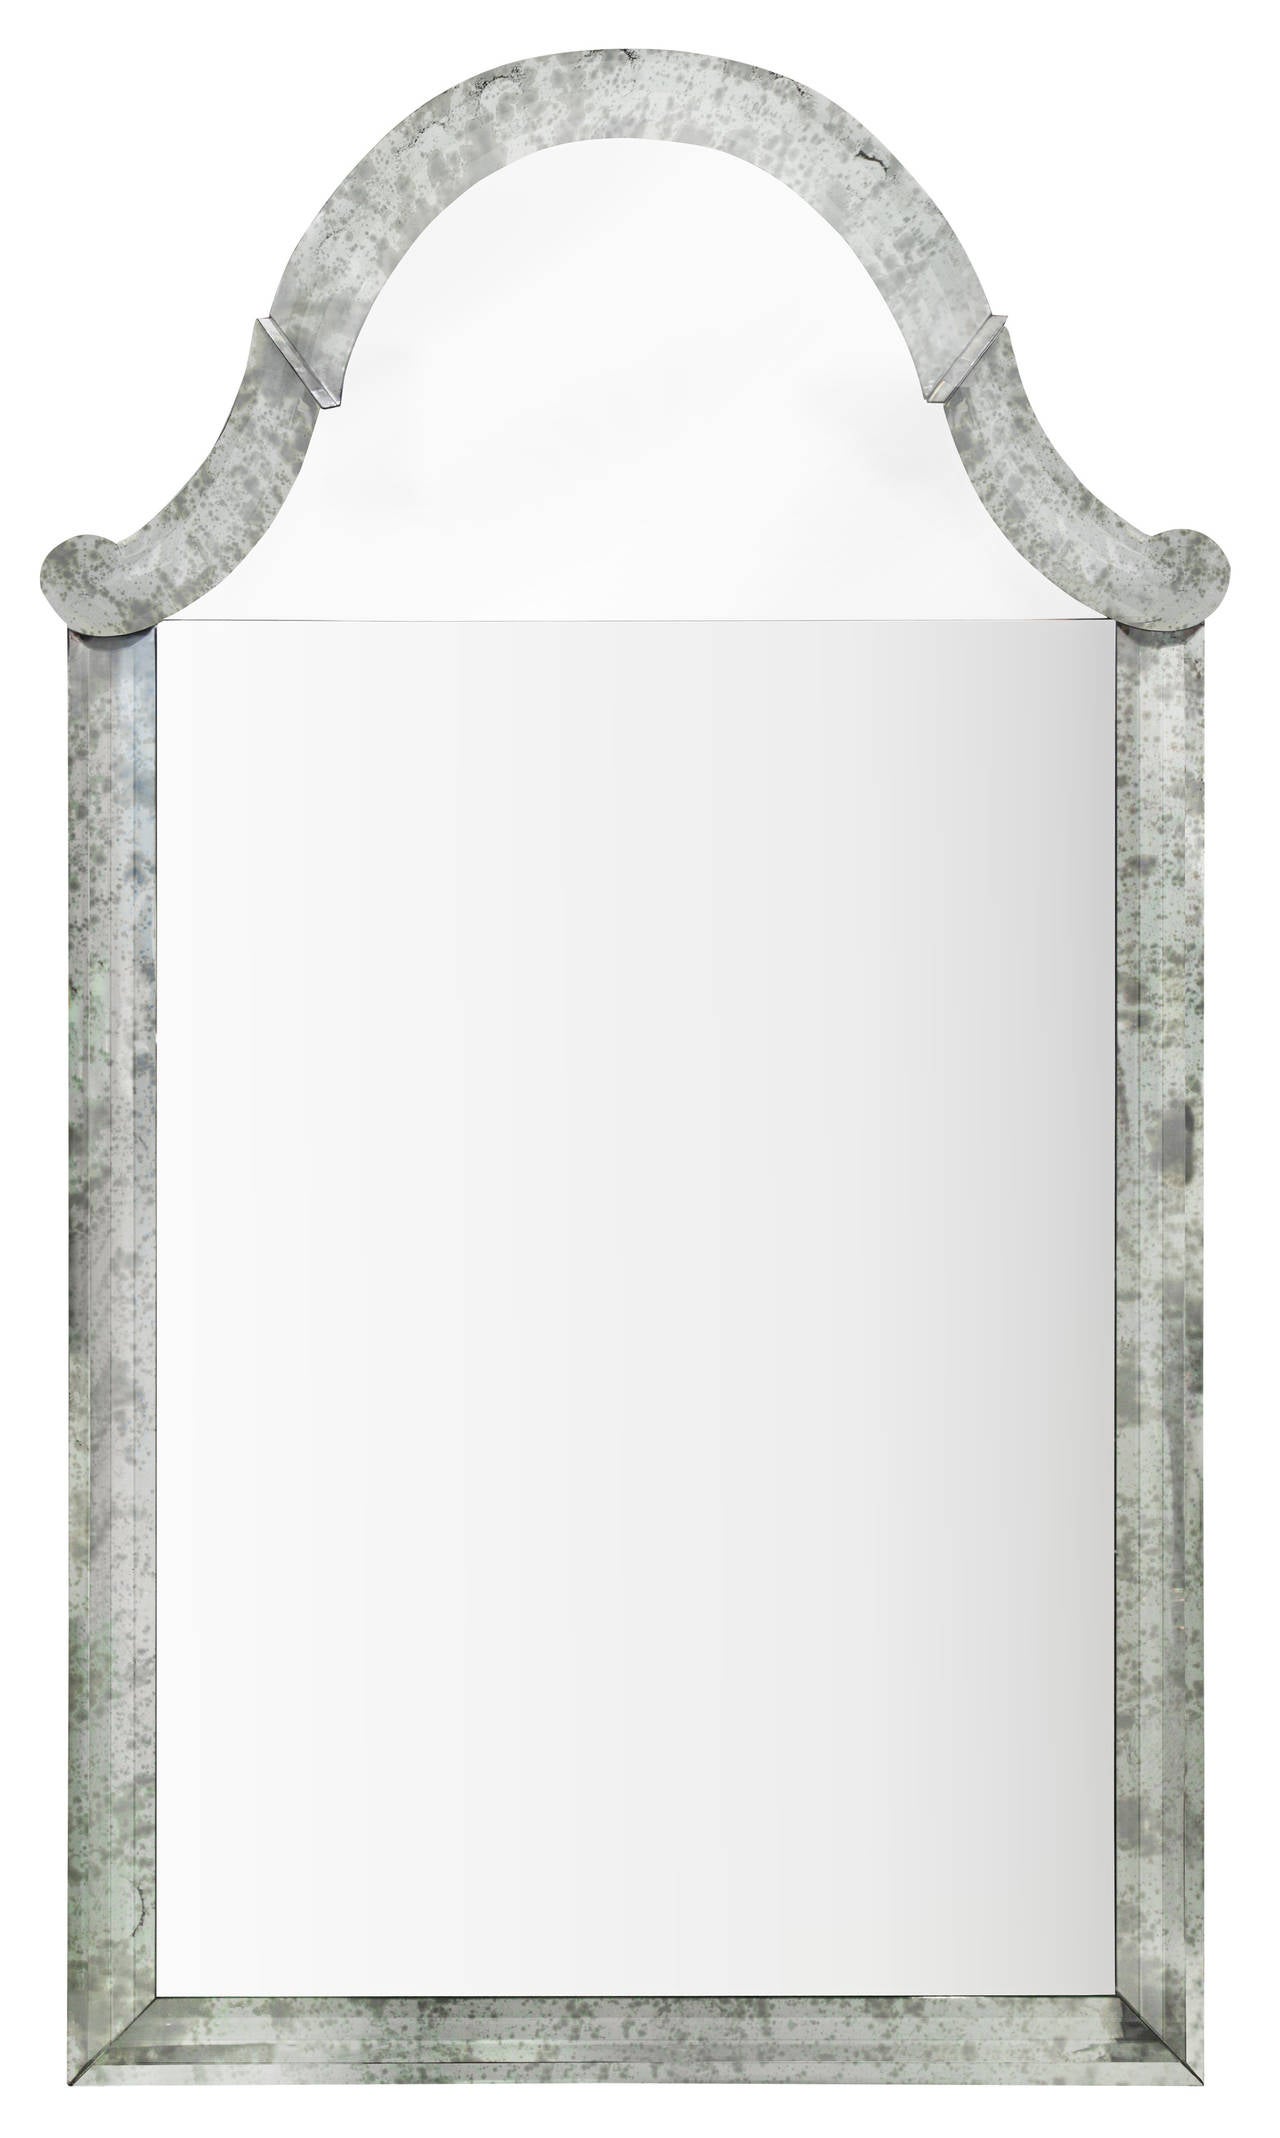 Pair of monumental and exceptional mirrors with antiqued silvered frames, American, 1940's. Each glass piece around the mirror is hand-finished and beveled.